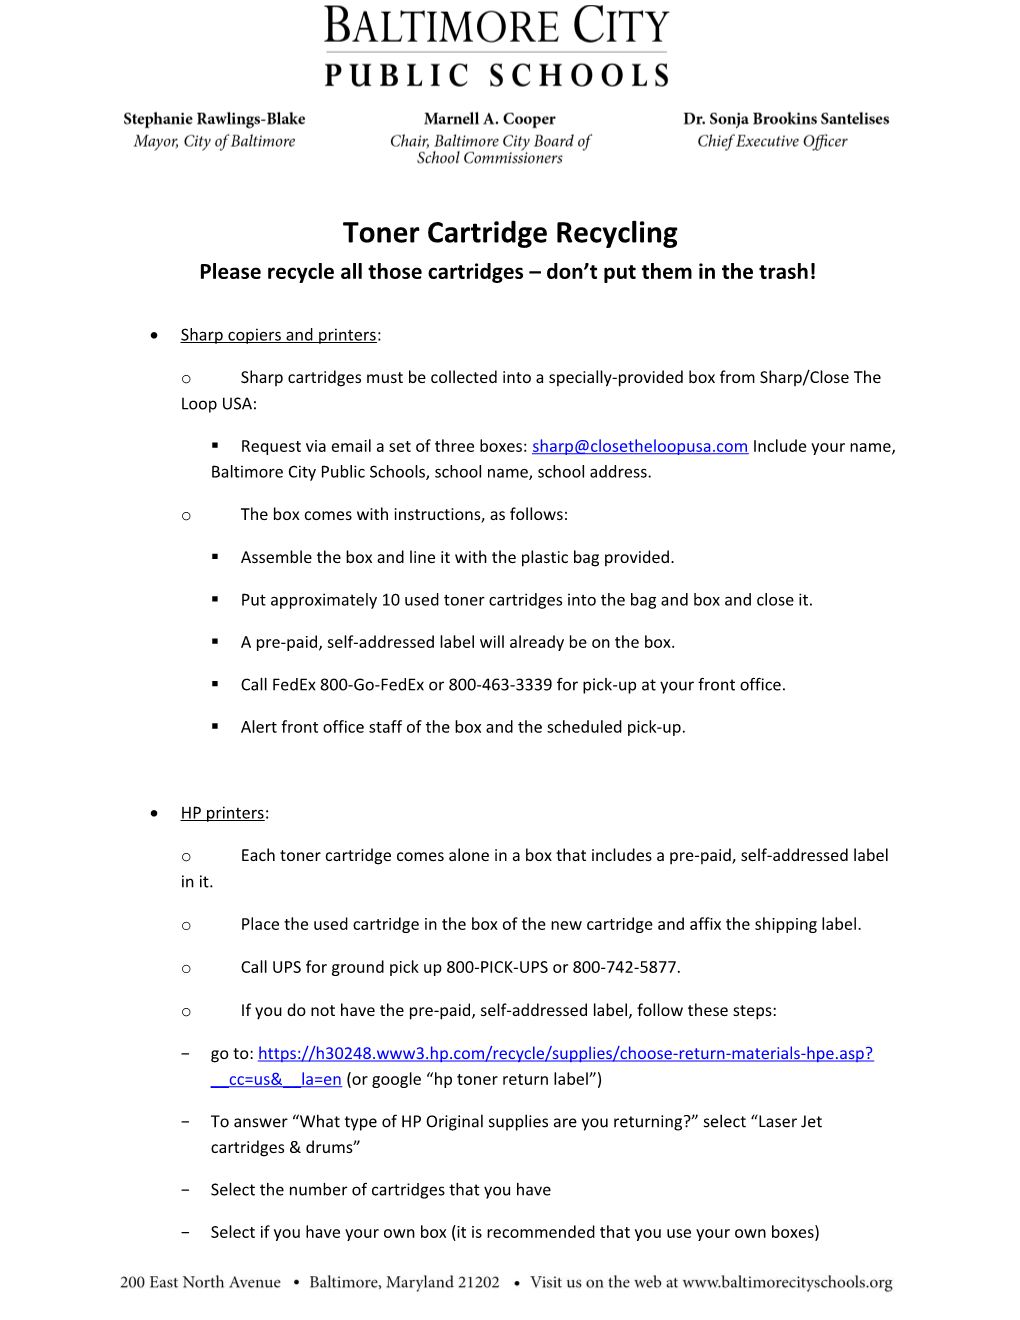 Please Recycle All Those Cartridges Don T Put Them in the Trash!